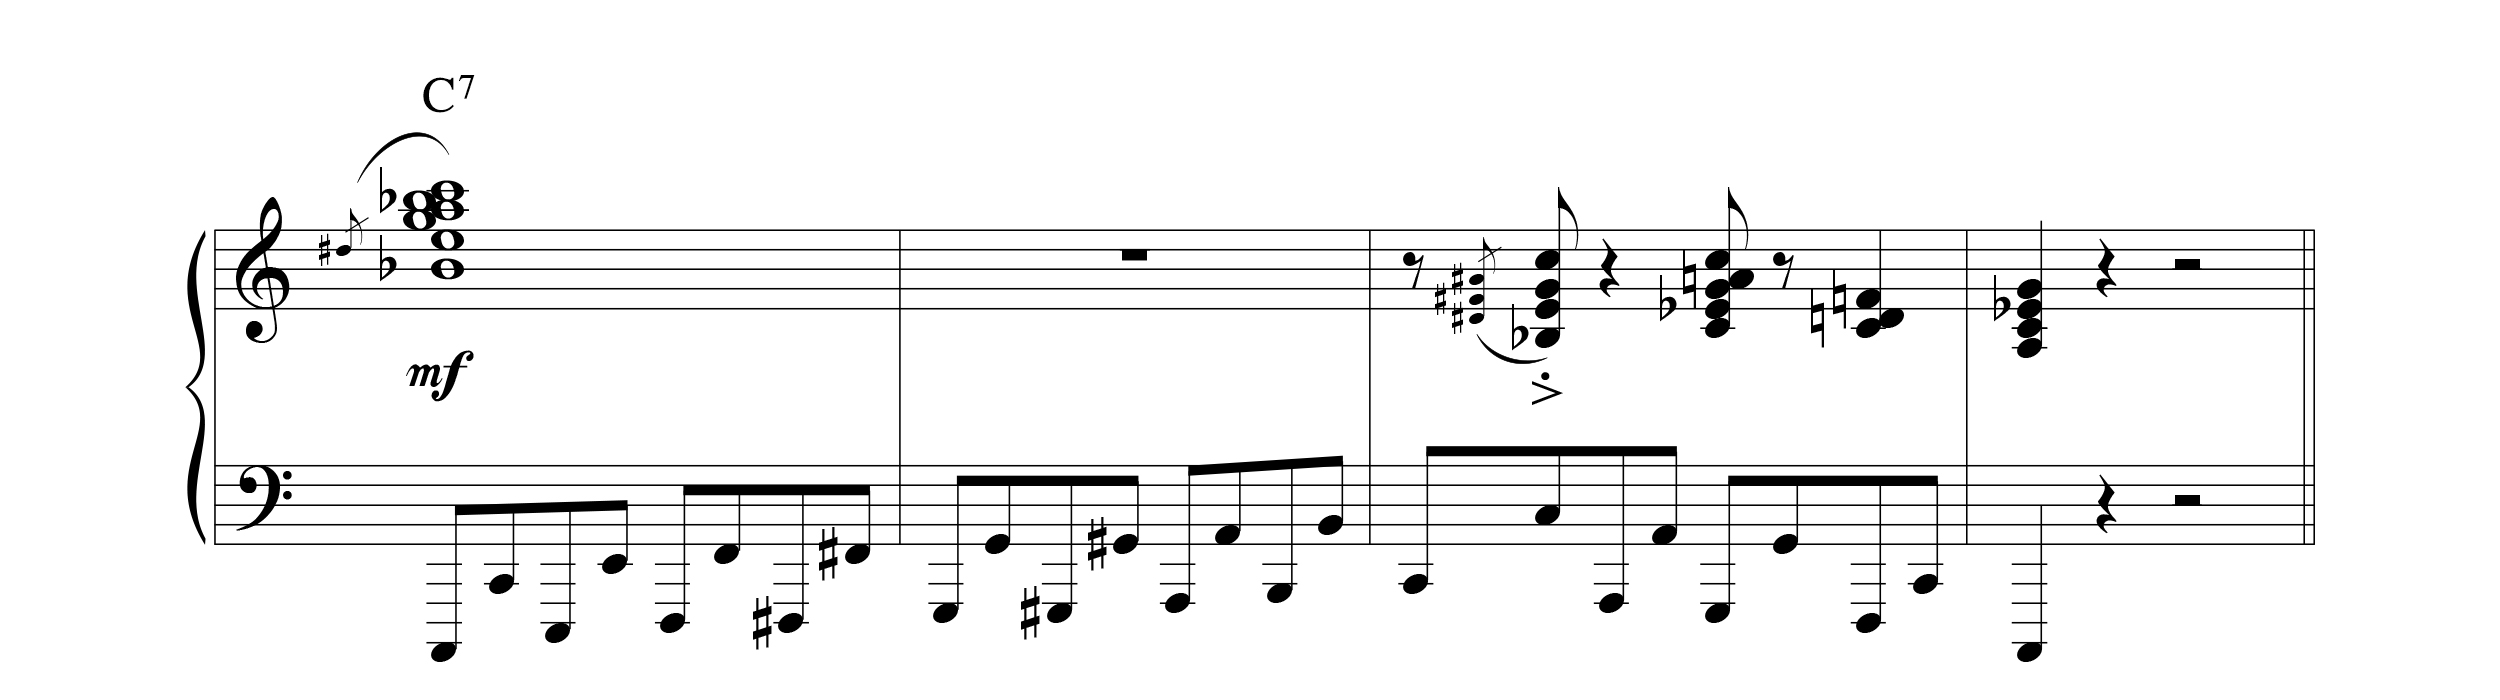 slow walking bass line example